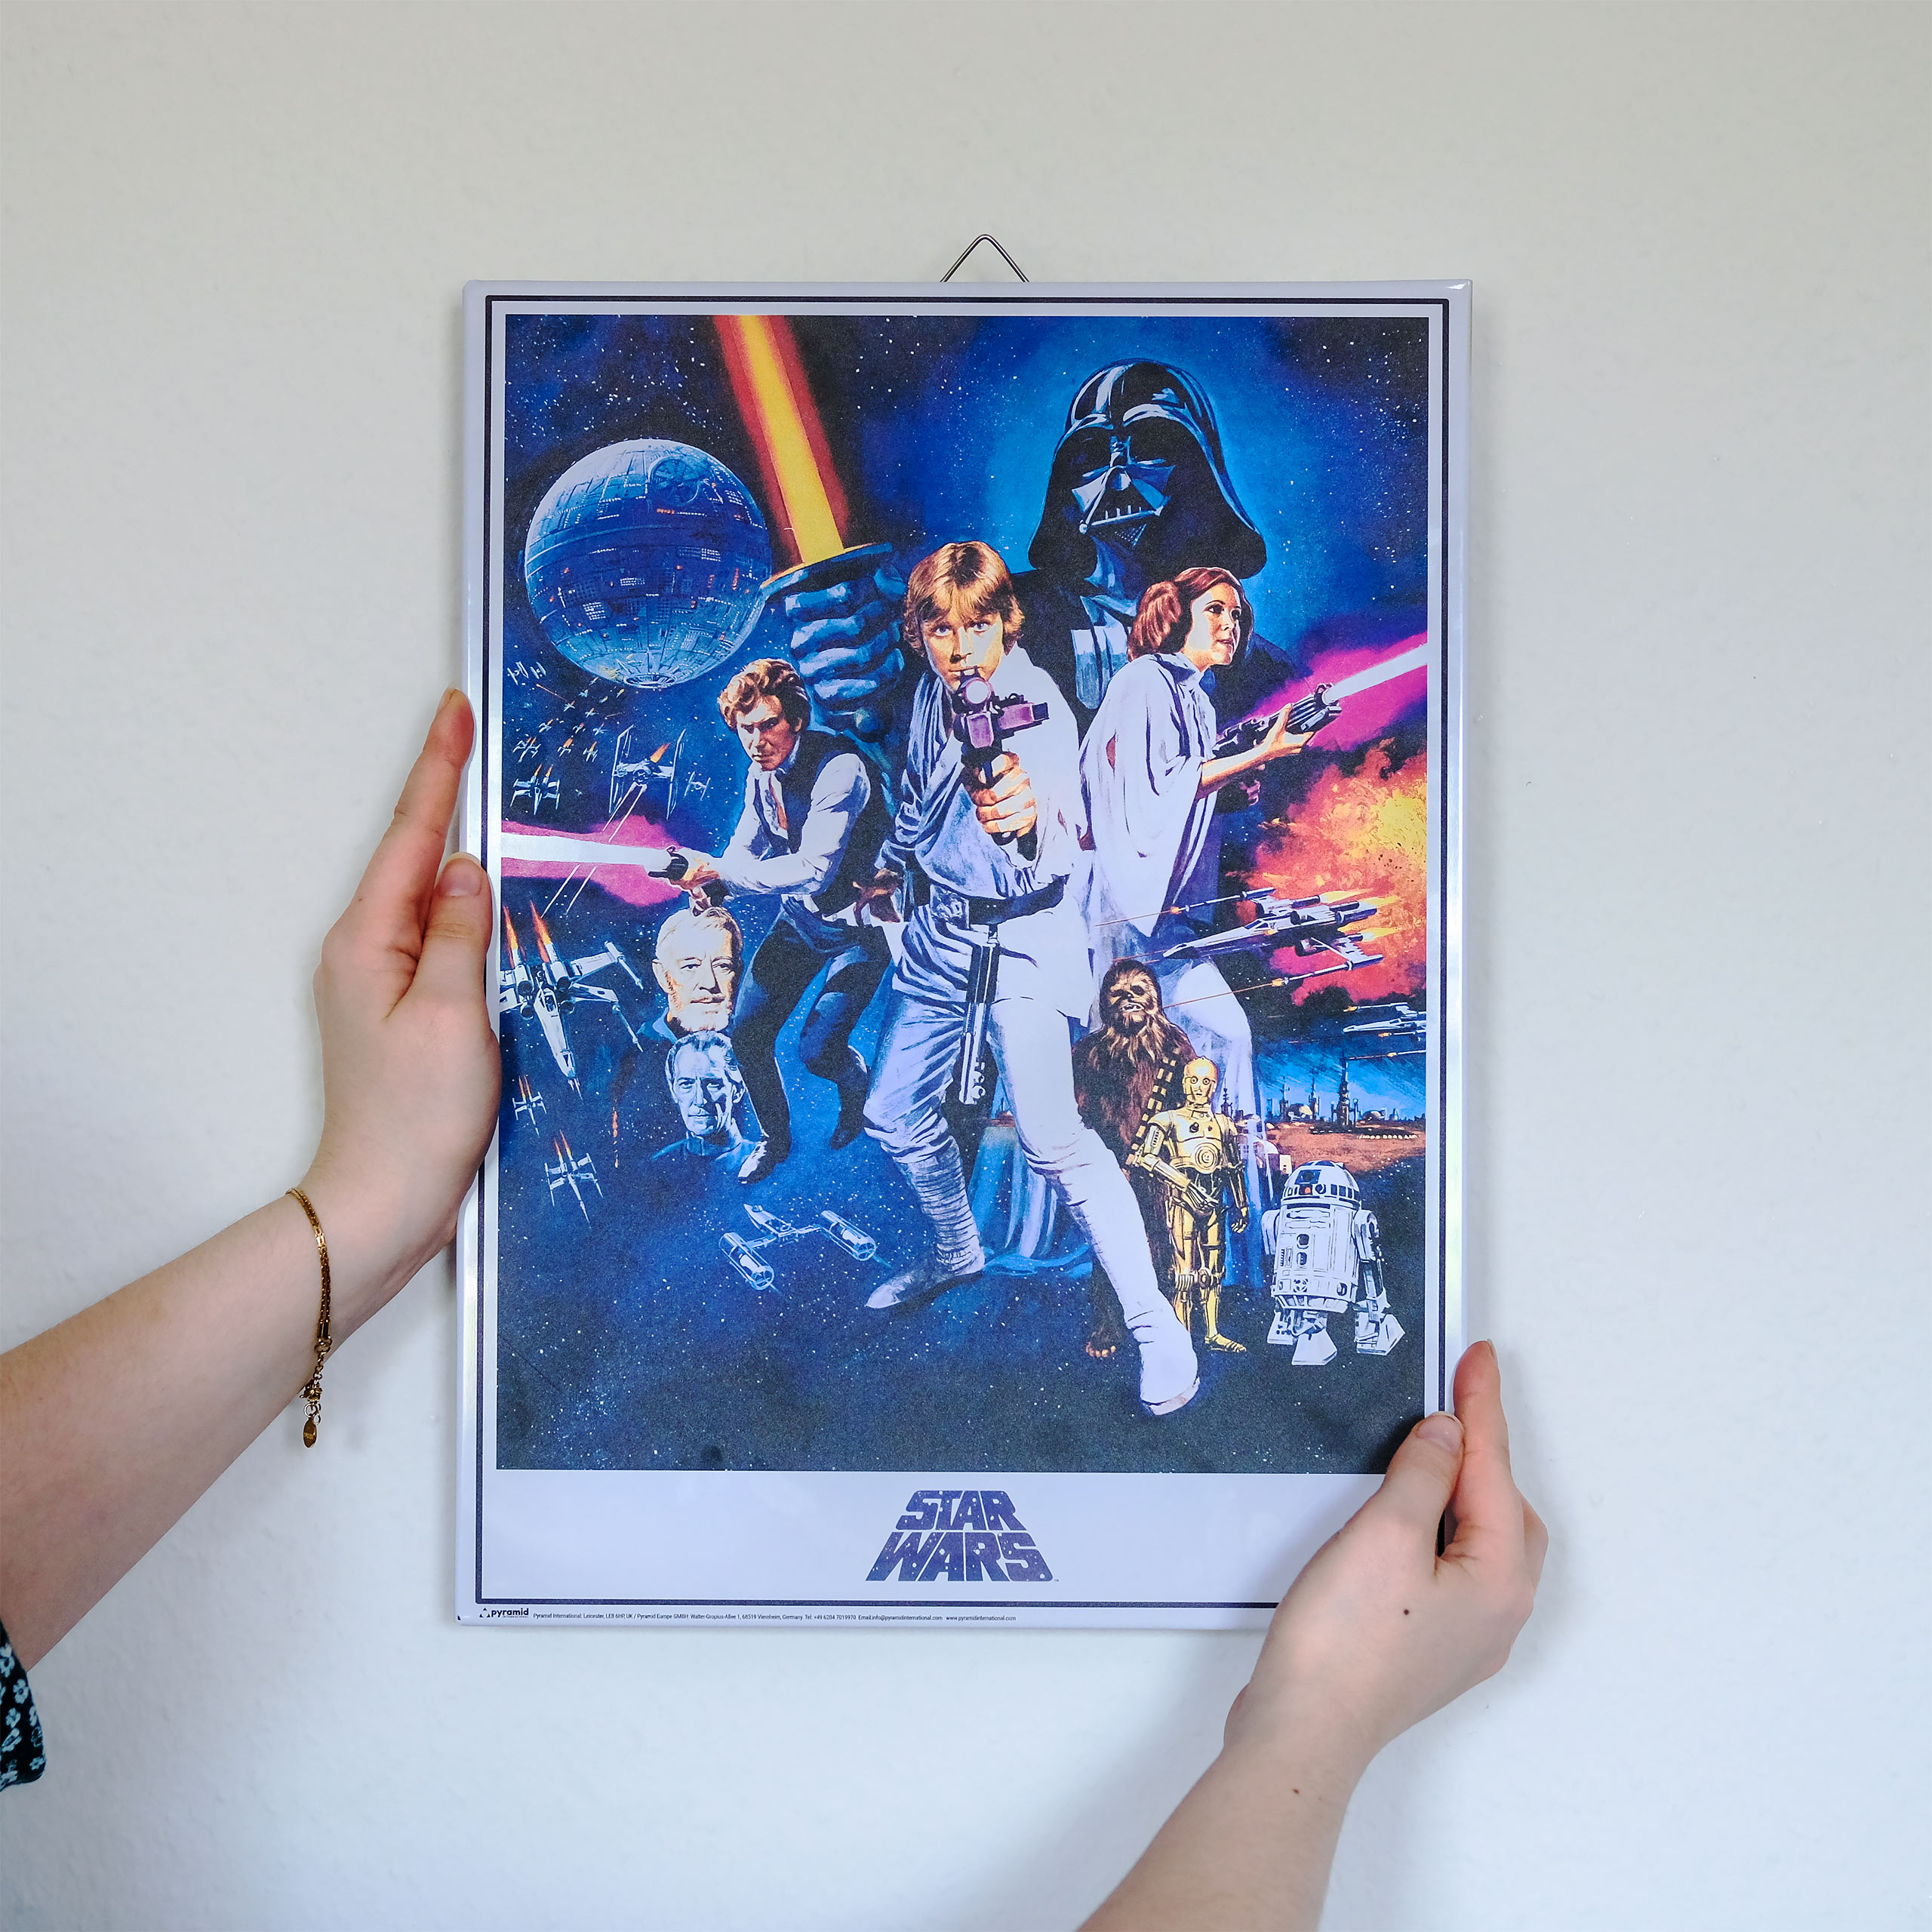 Star Wars - A New Hope Metal Poster